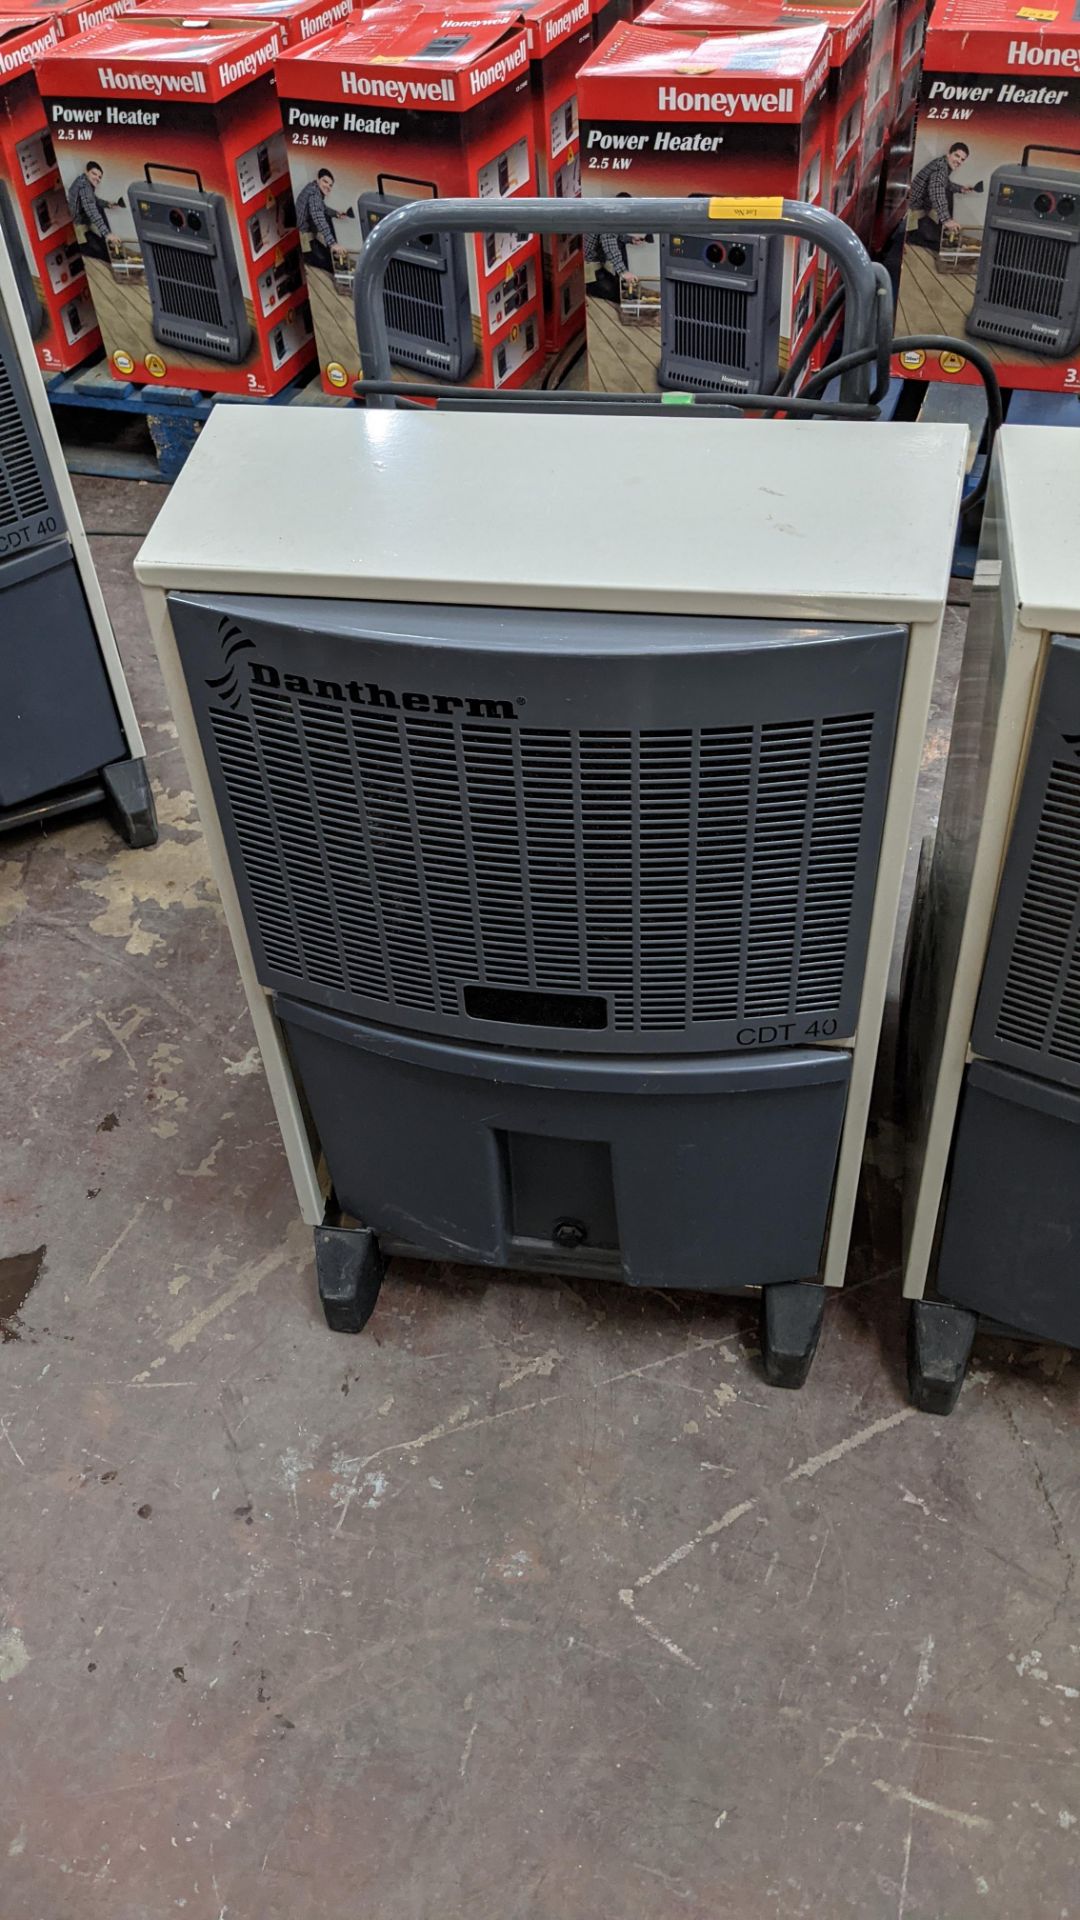 Dantherm model CDT40 dehumidifier. 6,338 recorded hours